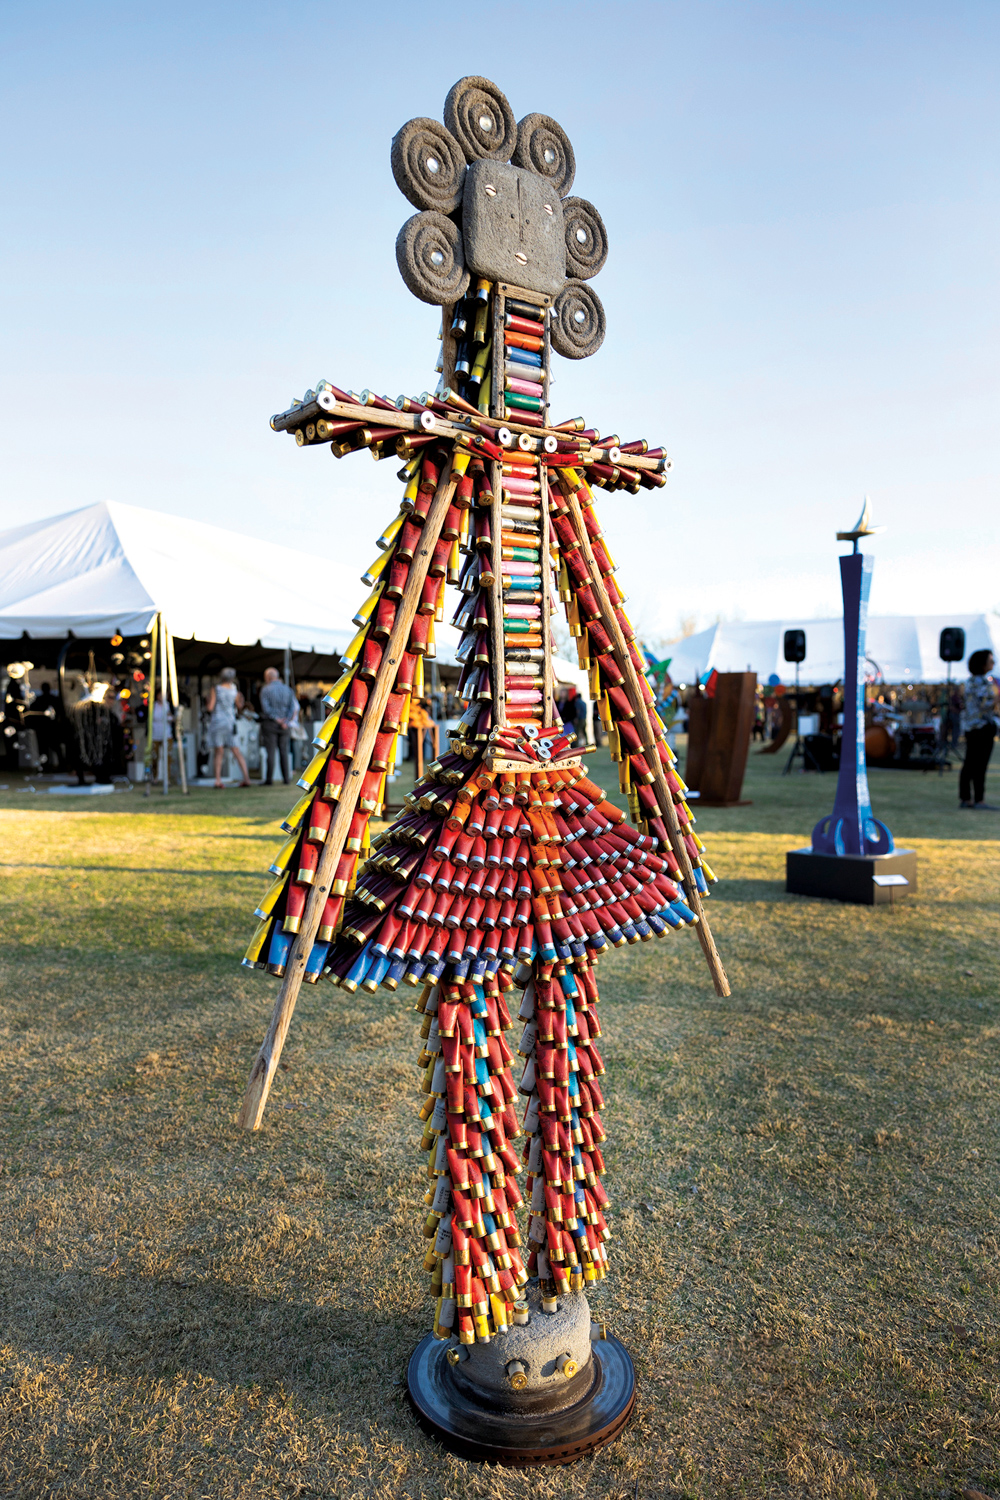 A sculpture on display at an outdoor fair in Tucson